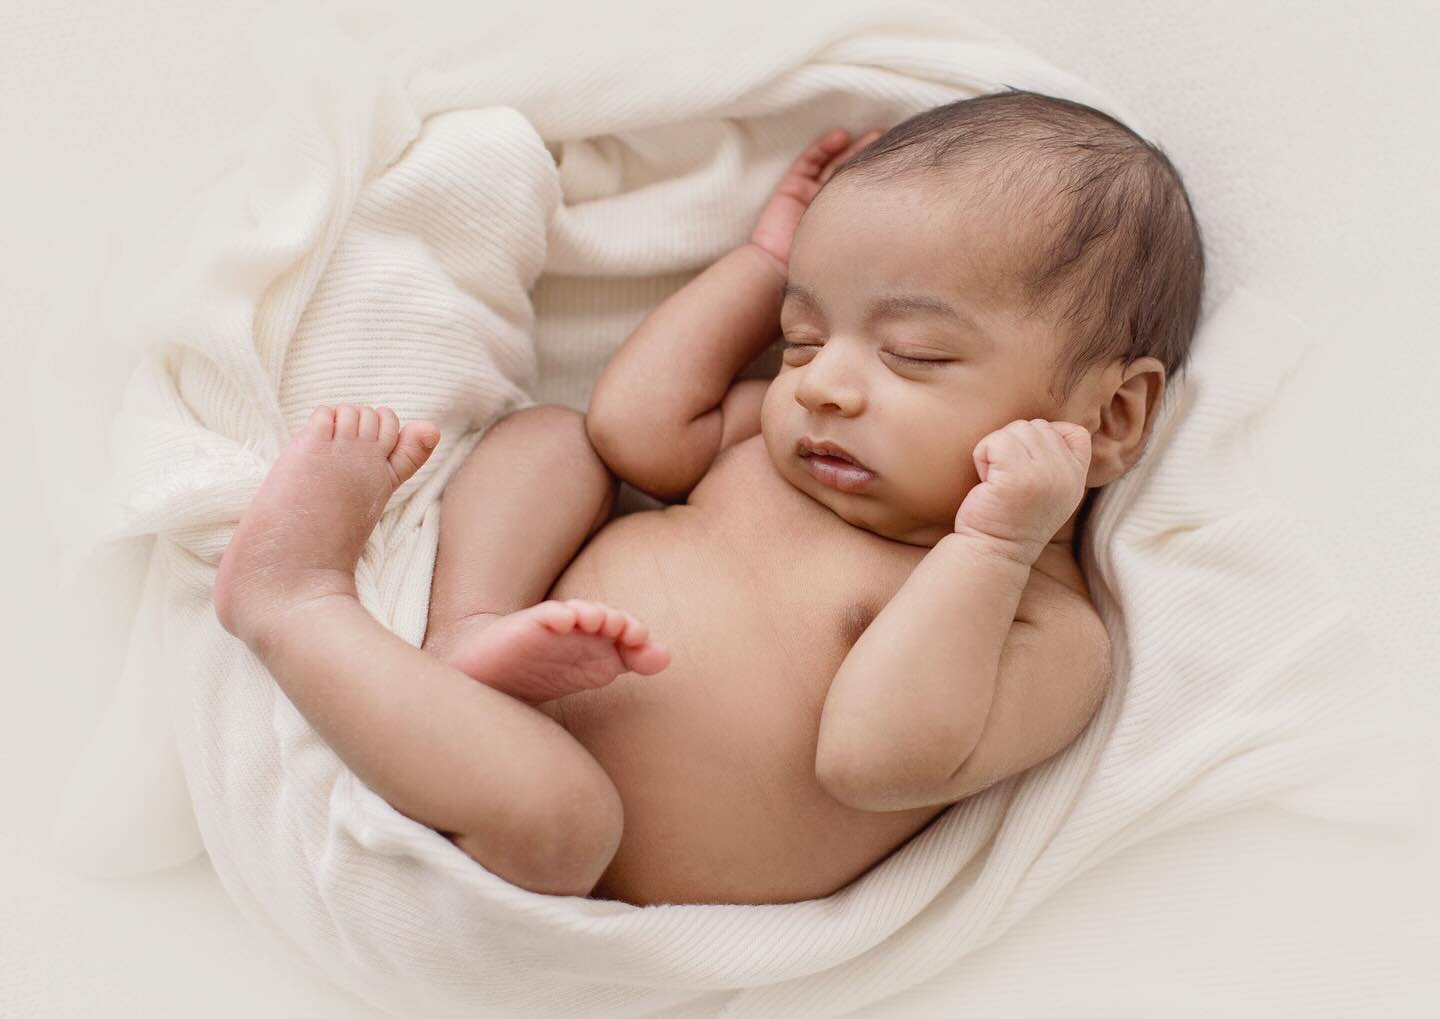 I will never get over the sweet simplicity of a newborn&hellip;the incredible way God knits them together in their mother&rsquo;s womb in a short nine months. I don&rsquo;t mean to offend anyone, but I don&rsquo;t understand the concept of putting ba